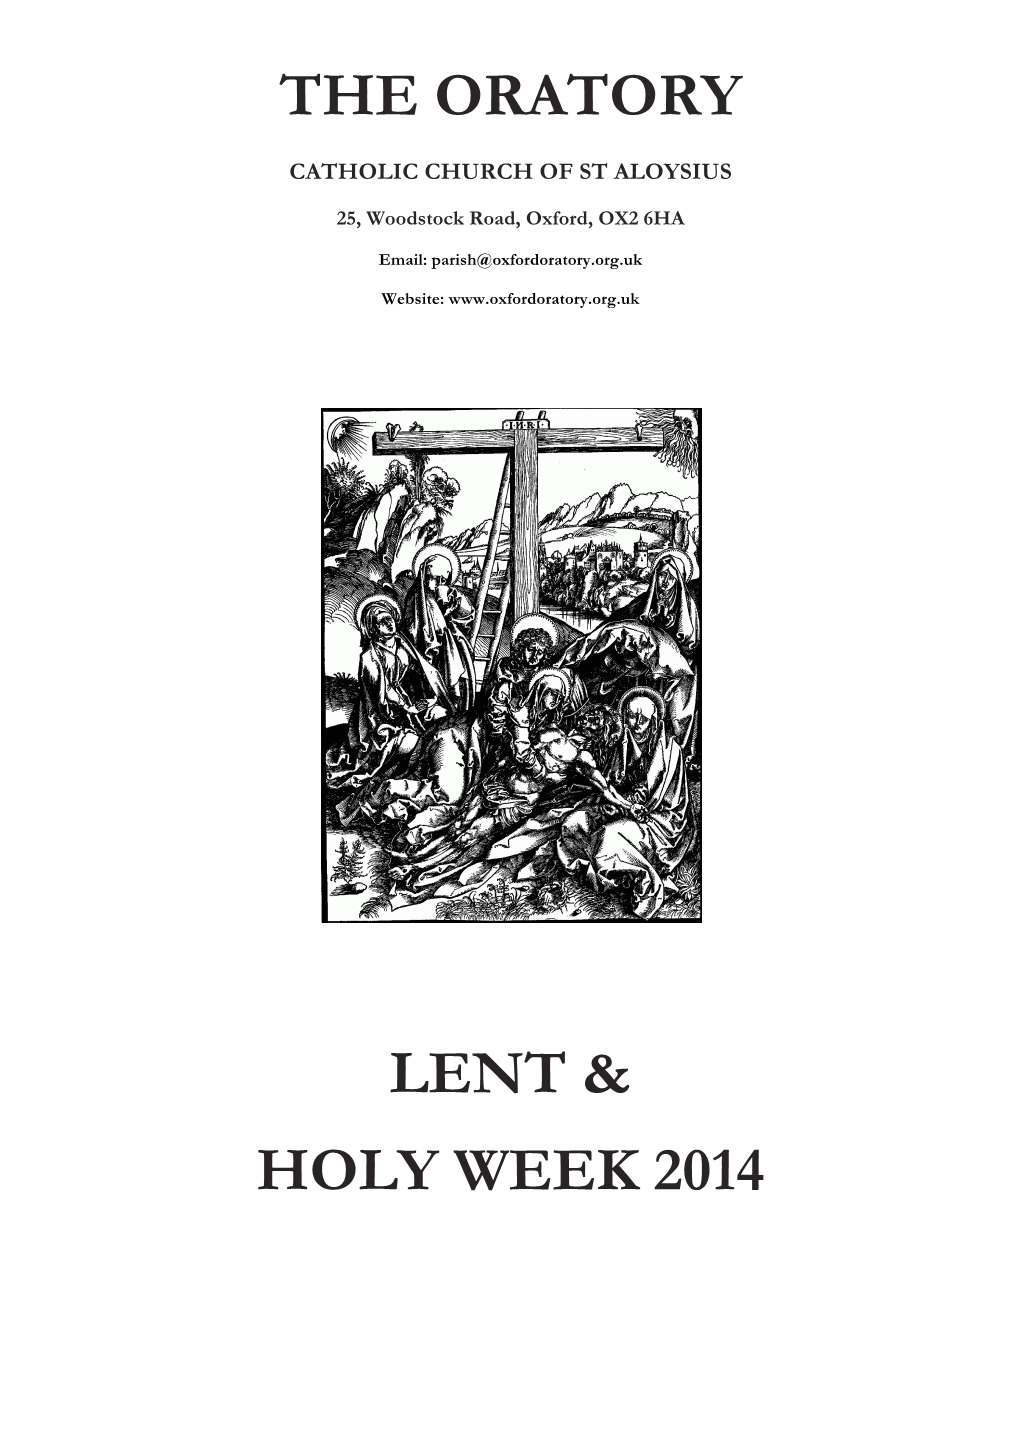 The Oratory Lent & Holy Week 2014